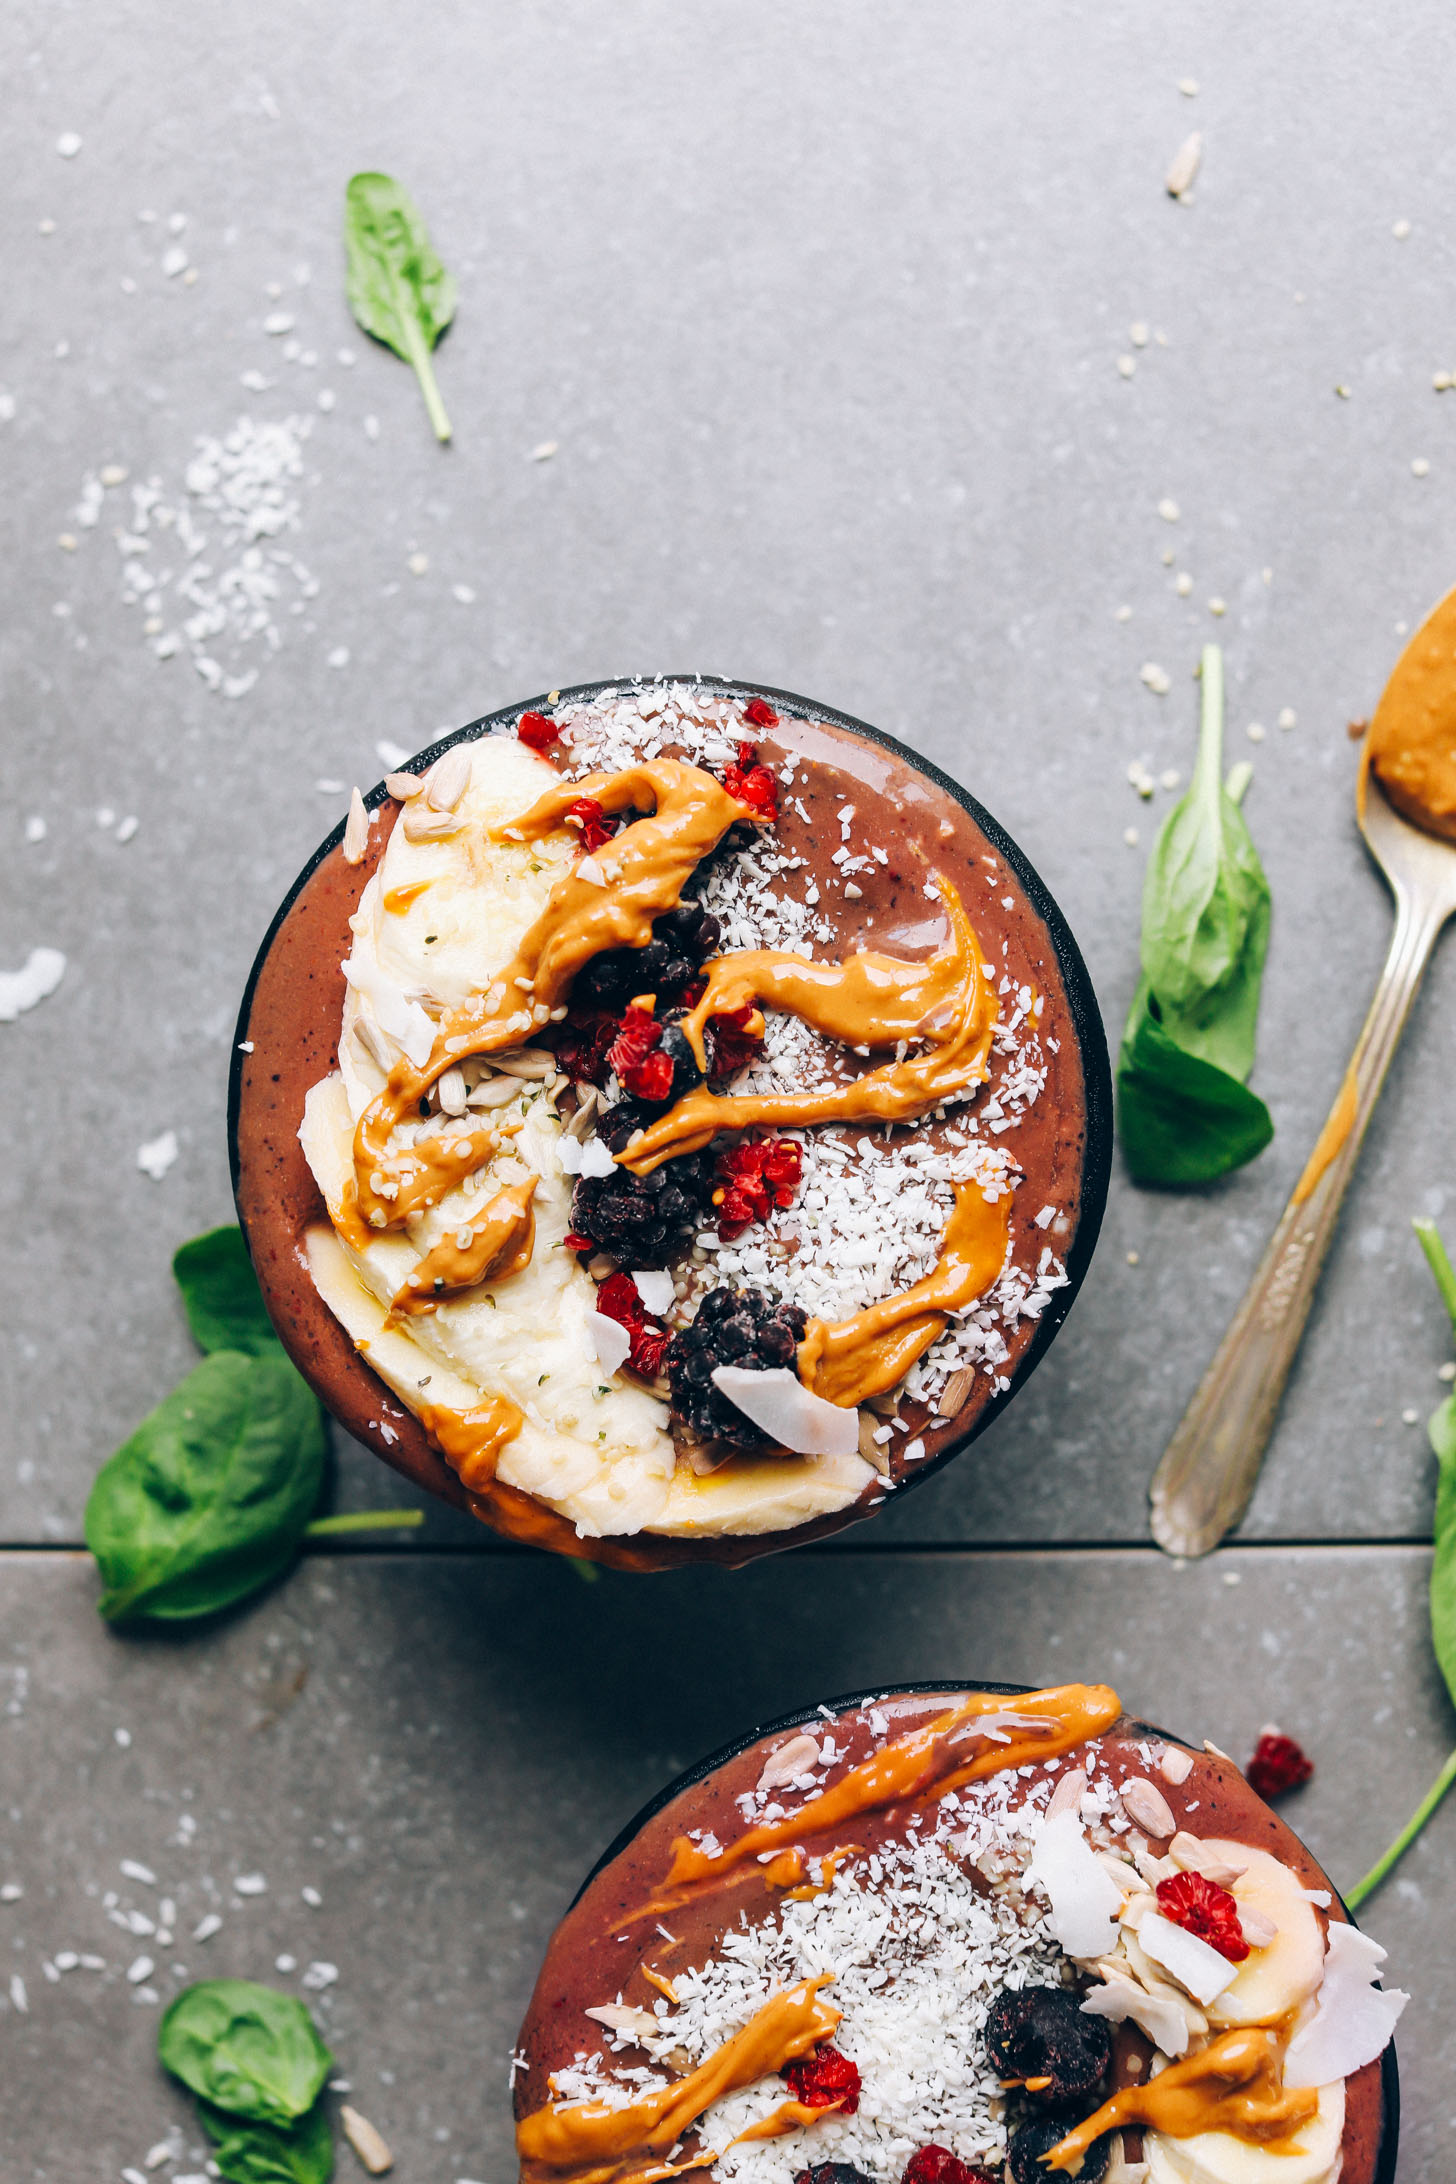 A big Peanut Butter & Jelly Acai Bowl for a plant-based breakfast